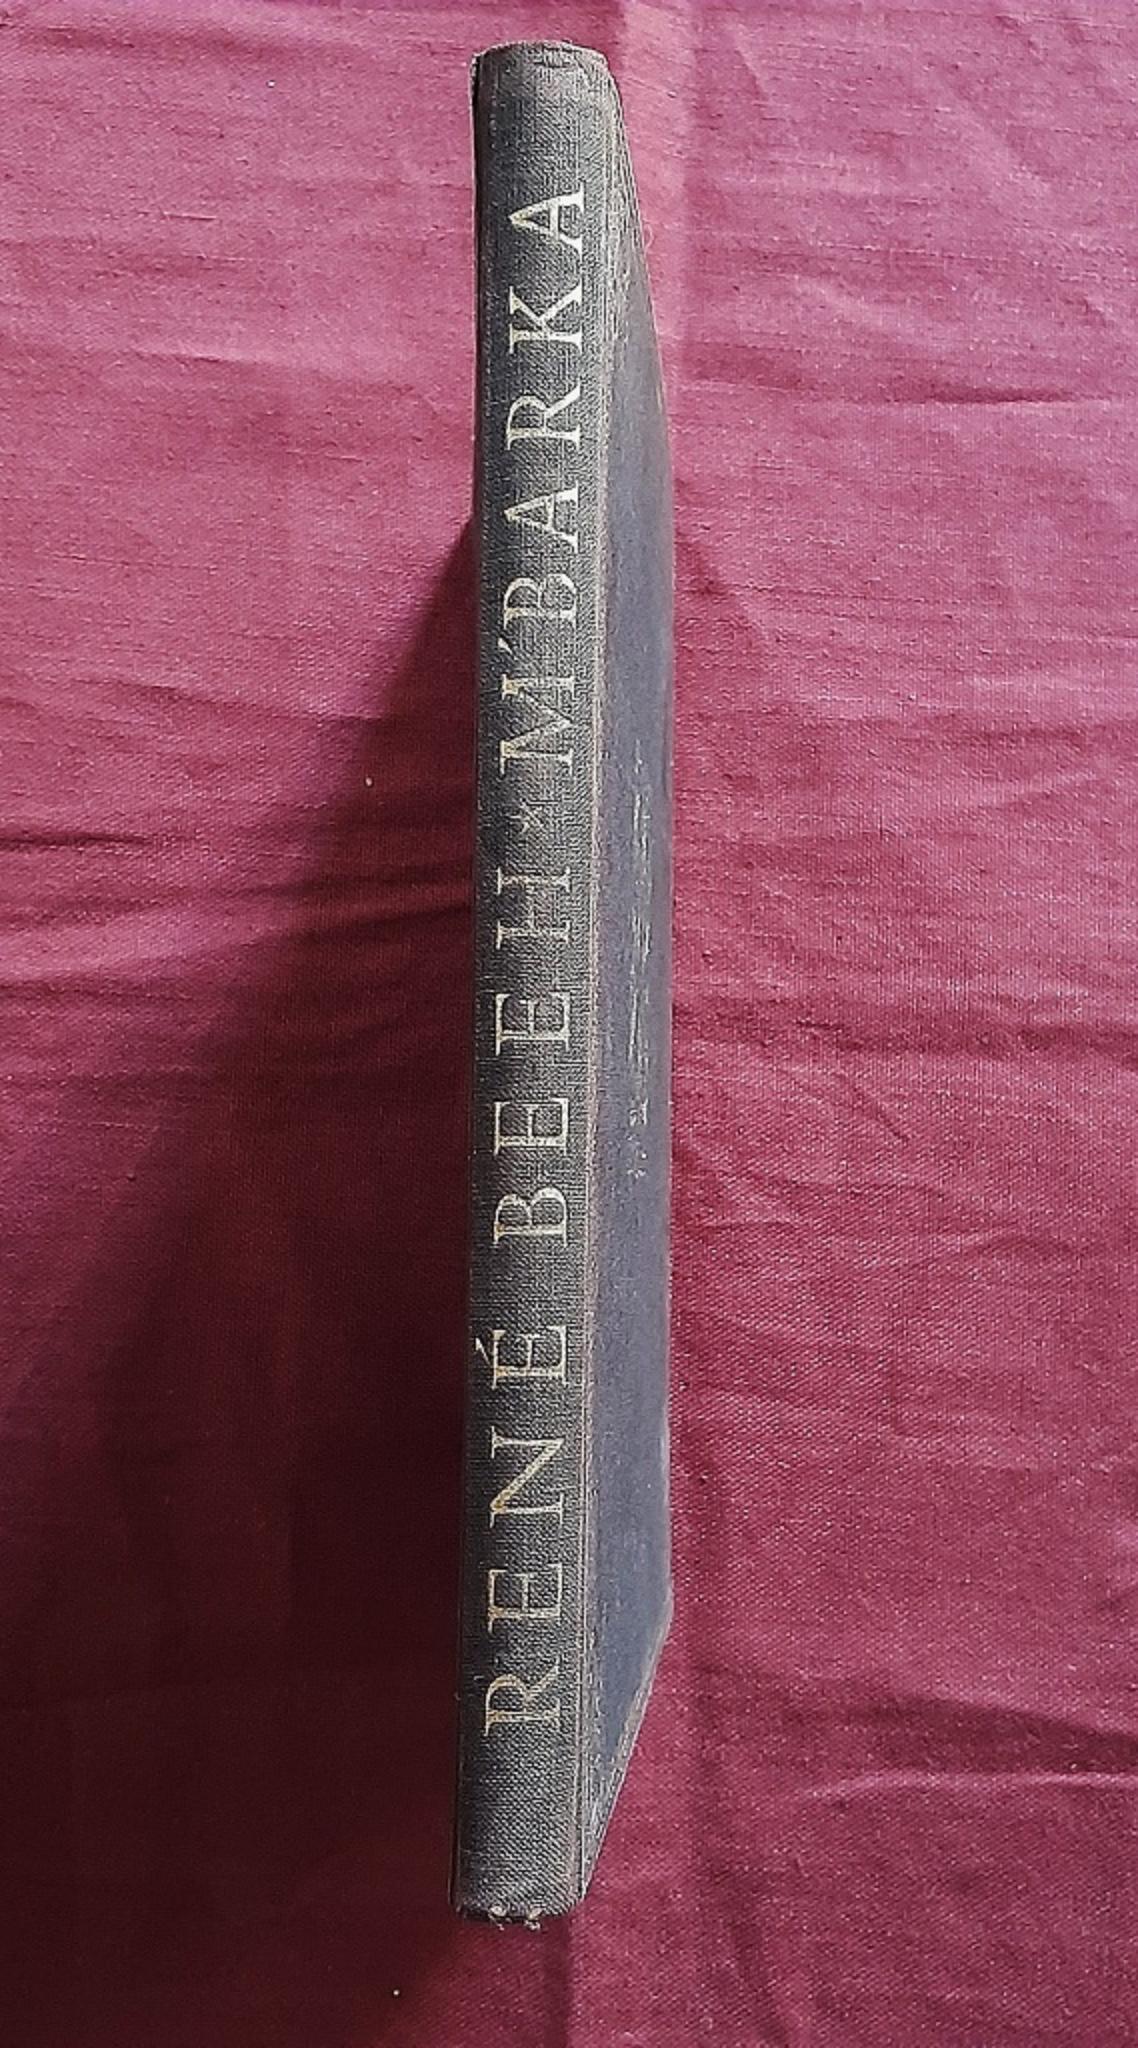 M. Barka - Vintage Rare Book Illustrated by René Beeh - 1914 For Sale 2